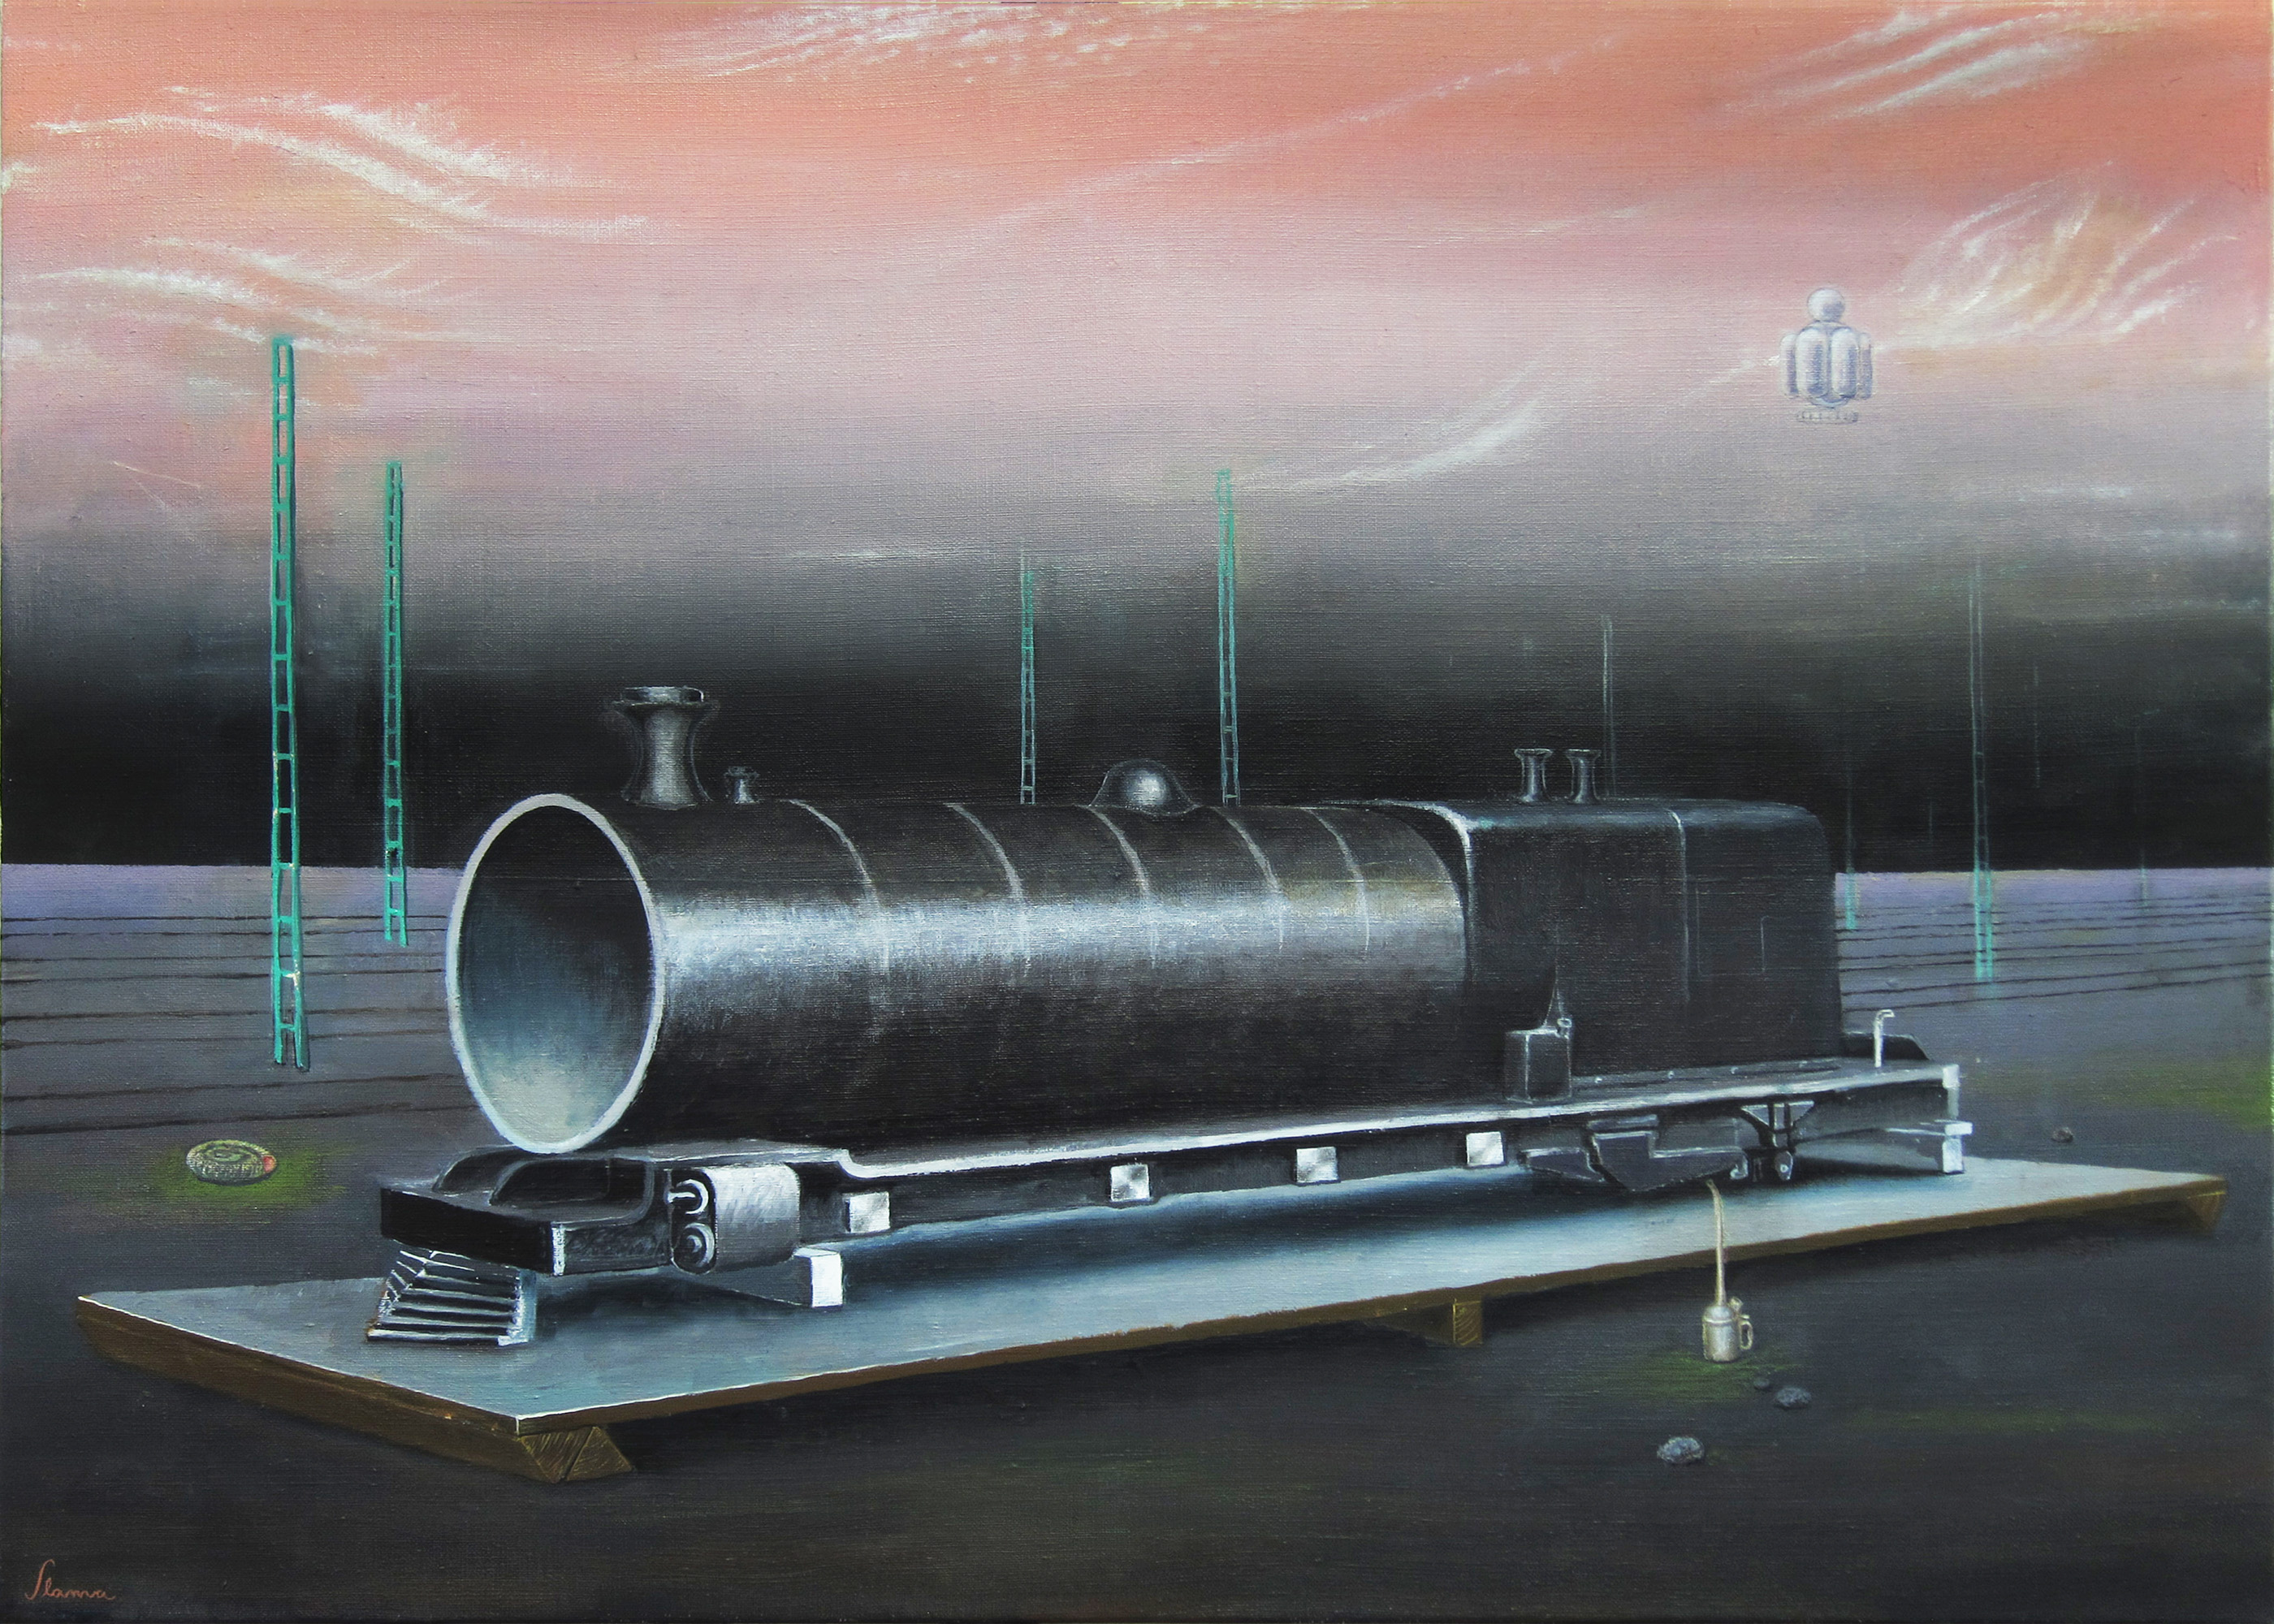 Oil painting resembling surrealist inspired propaganda material for the hobby of (model) railroading. All art and comments by Torsten Slama and the Aristocratic Toy Engine Society.